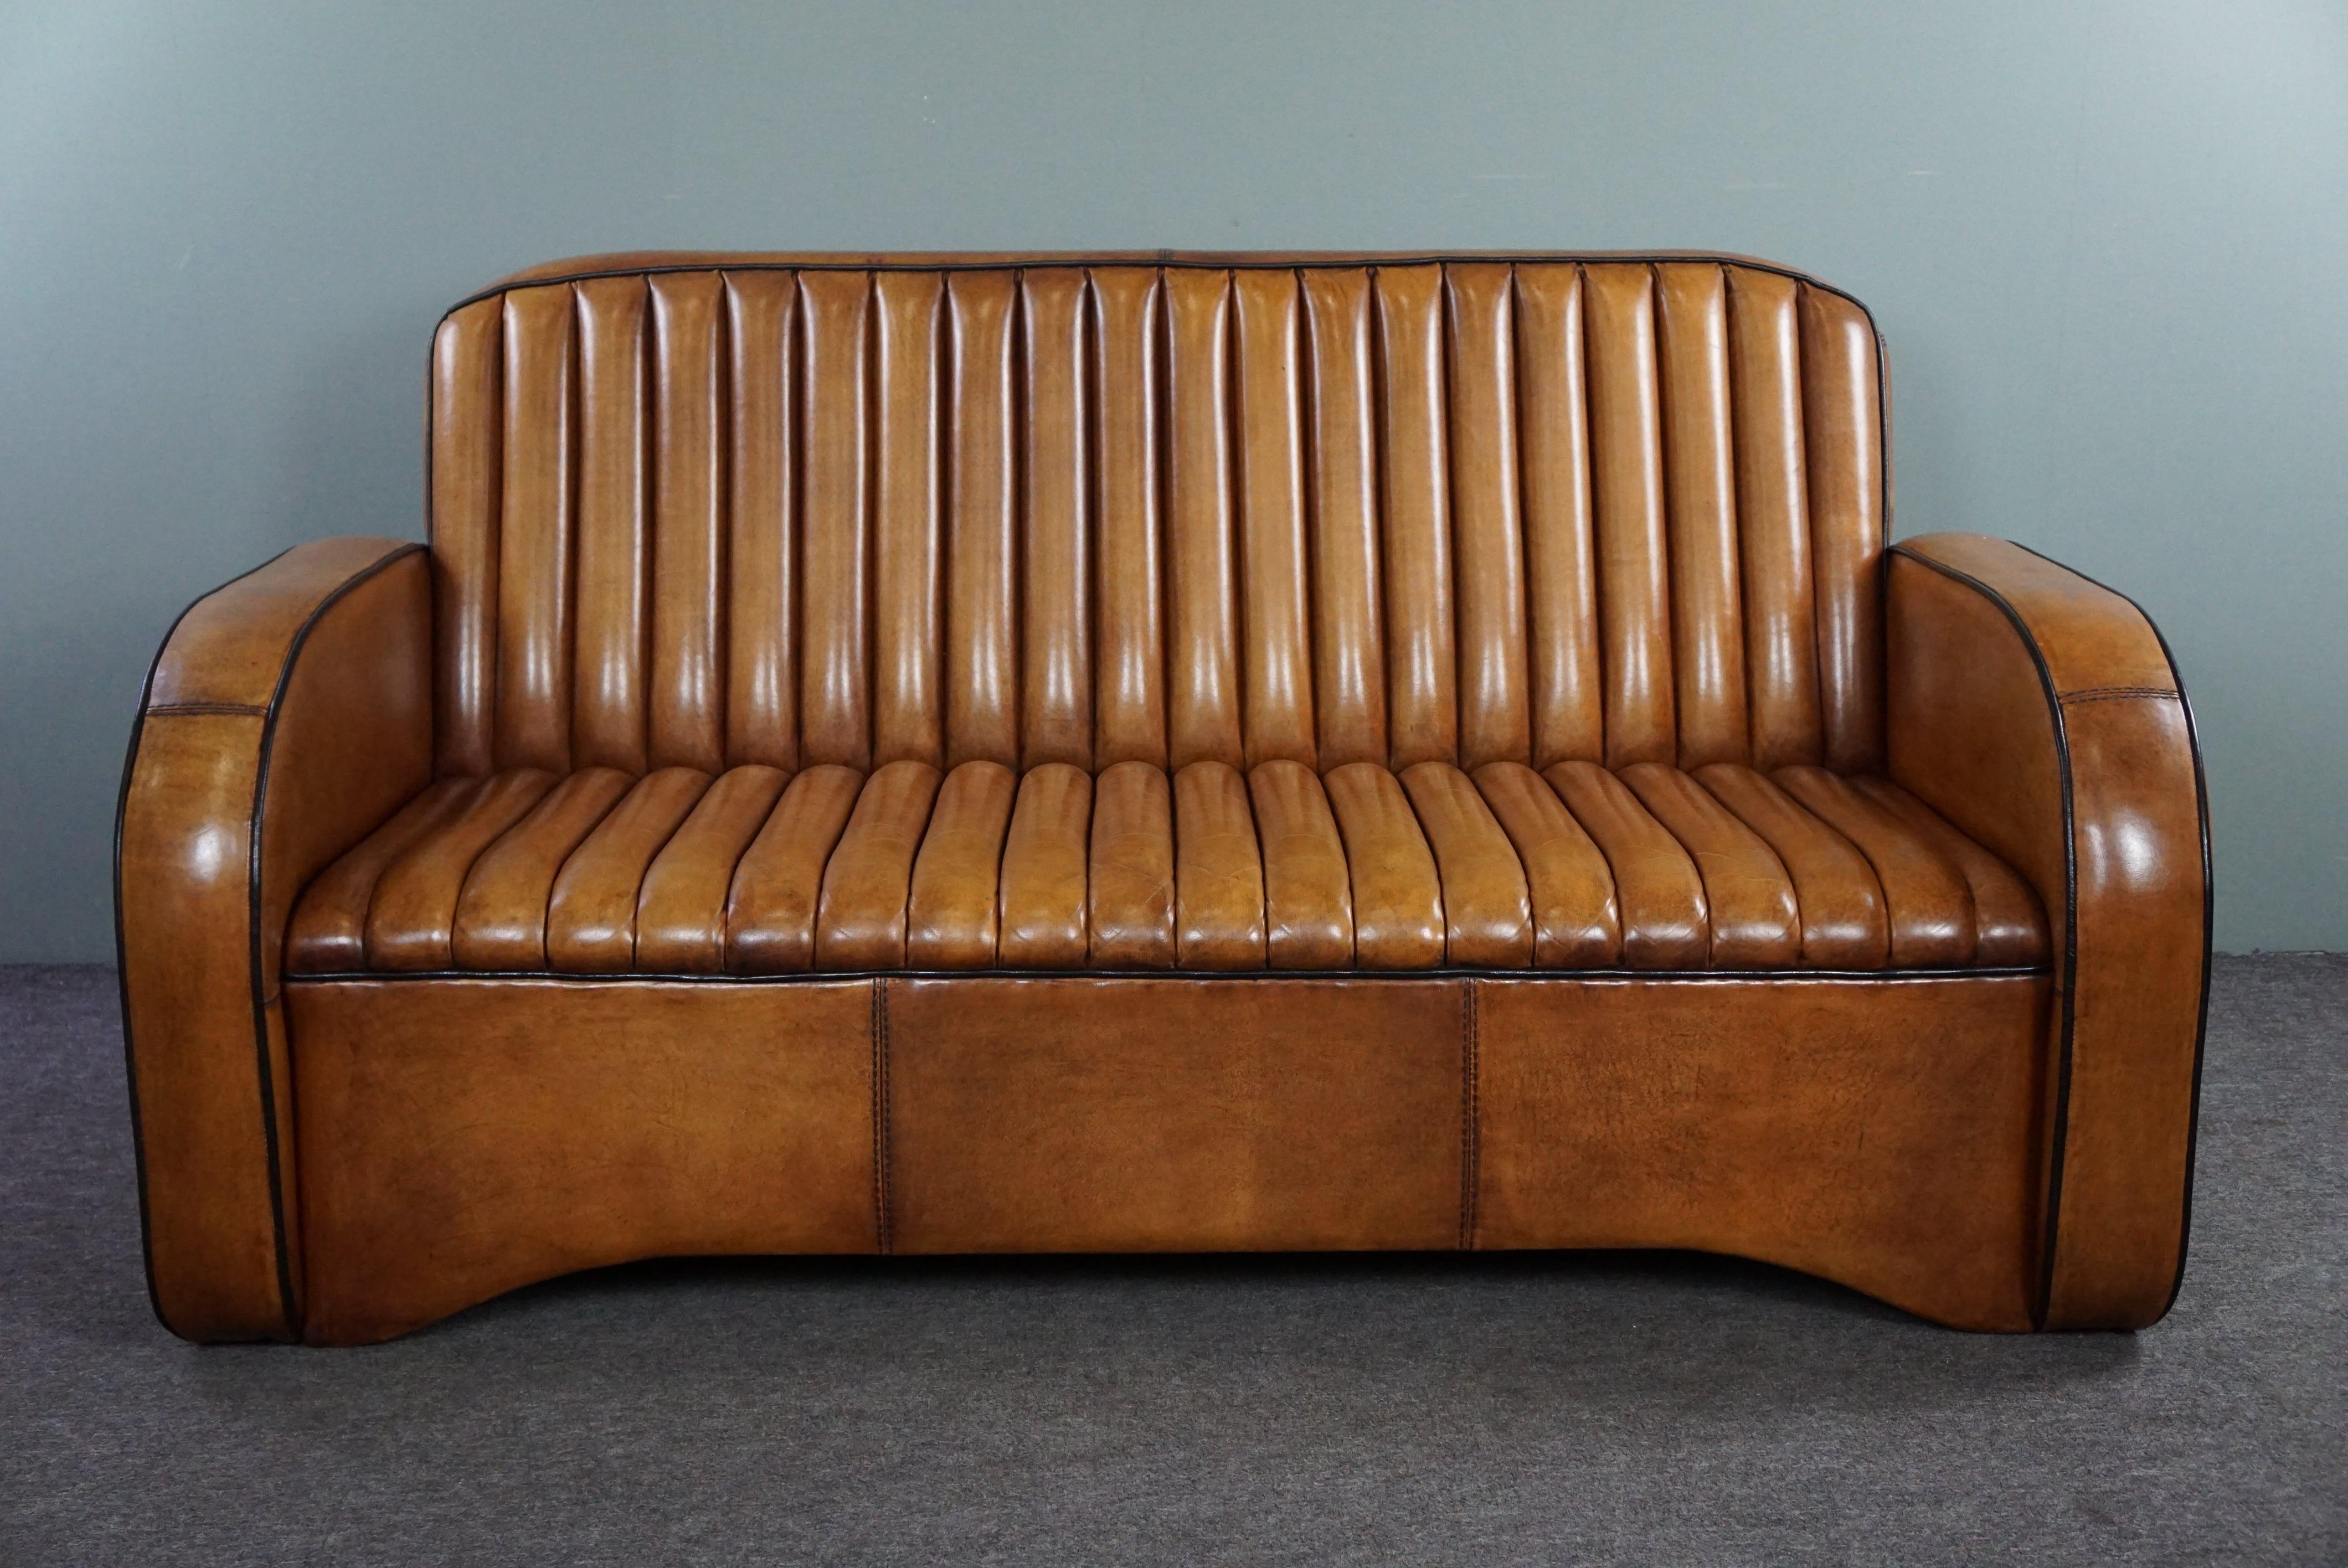 Offered is this hand-patinated cognac-colored sofa made of beautiful sheep leather.

This 2.5-seater sofa is beautifully upholstered with sheep leather and hand patinated in a warm cognac color. The sofa is finished with black piping along the